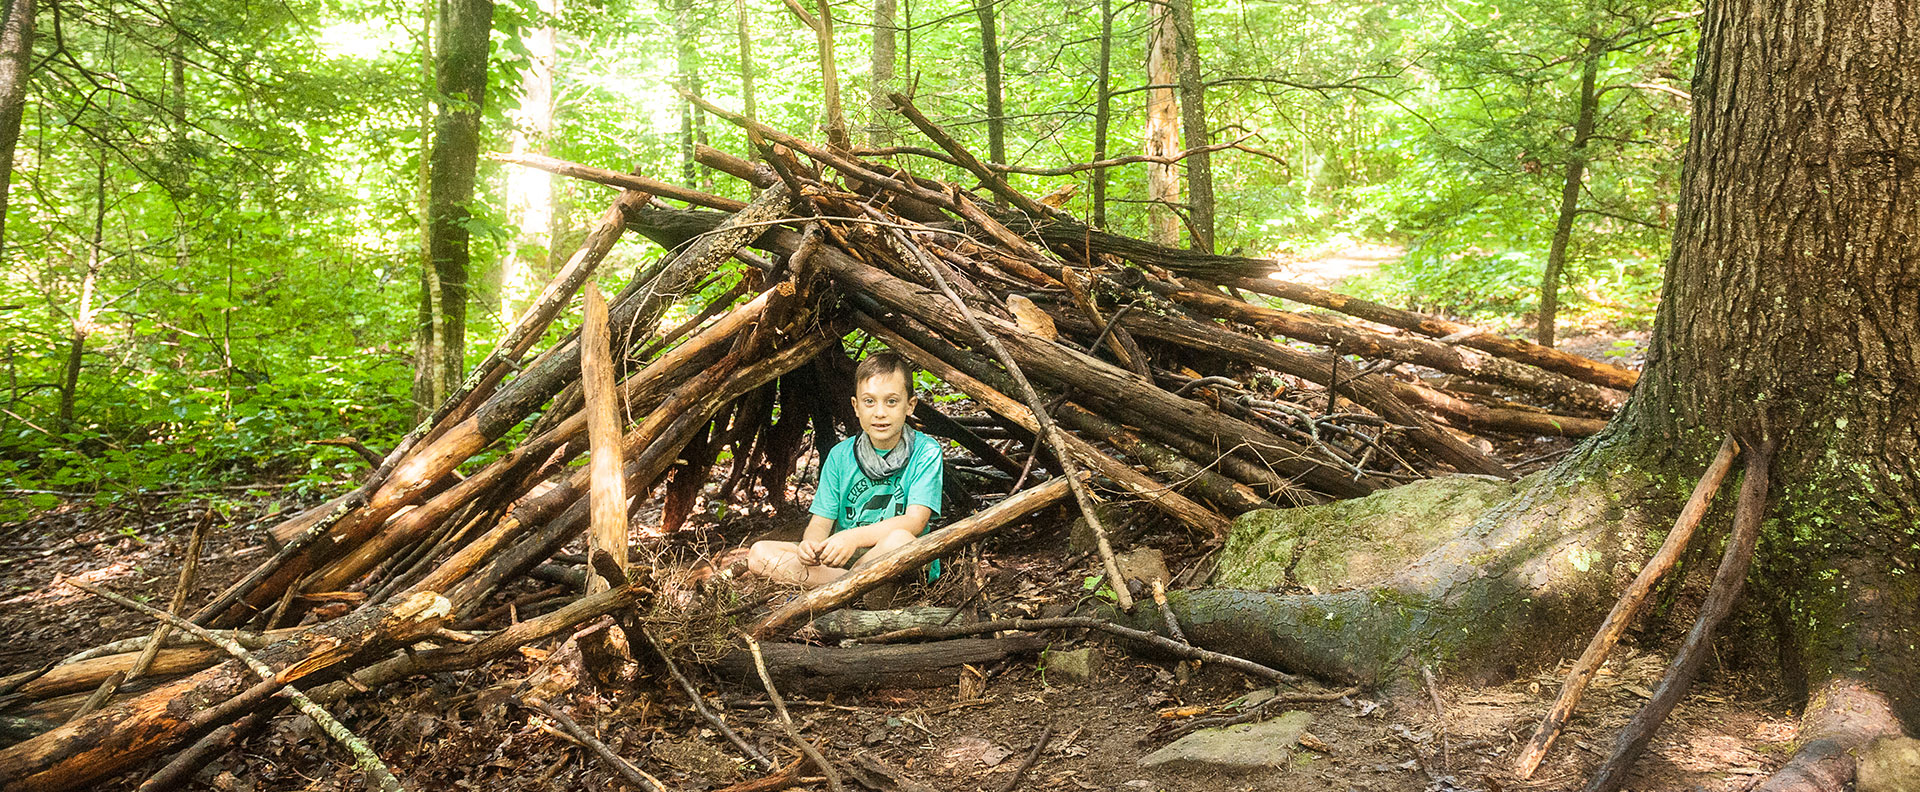 Deep in the forest a boy at summer day camp enjoys his primitive hut